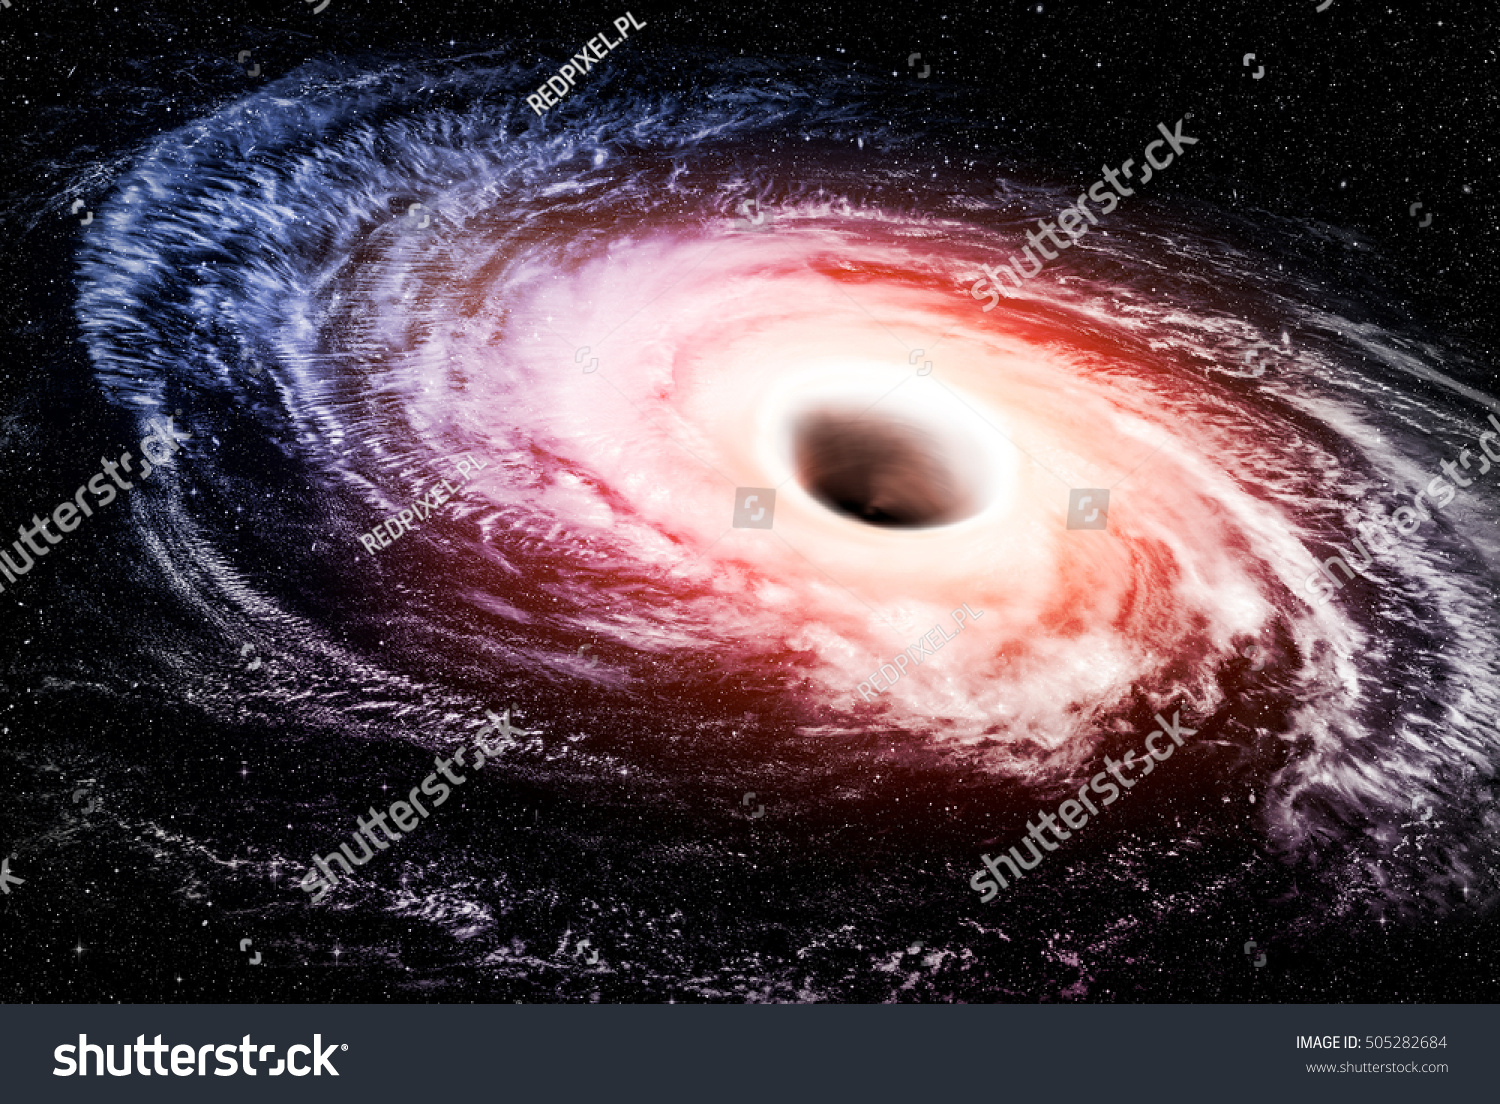 hole black space way fiction hydrogen nebula galaxy white earth cloud cosmic atmosphere explosion meteorite deep star concept - stock image. Elements of this image furnished by NASA. #505282684